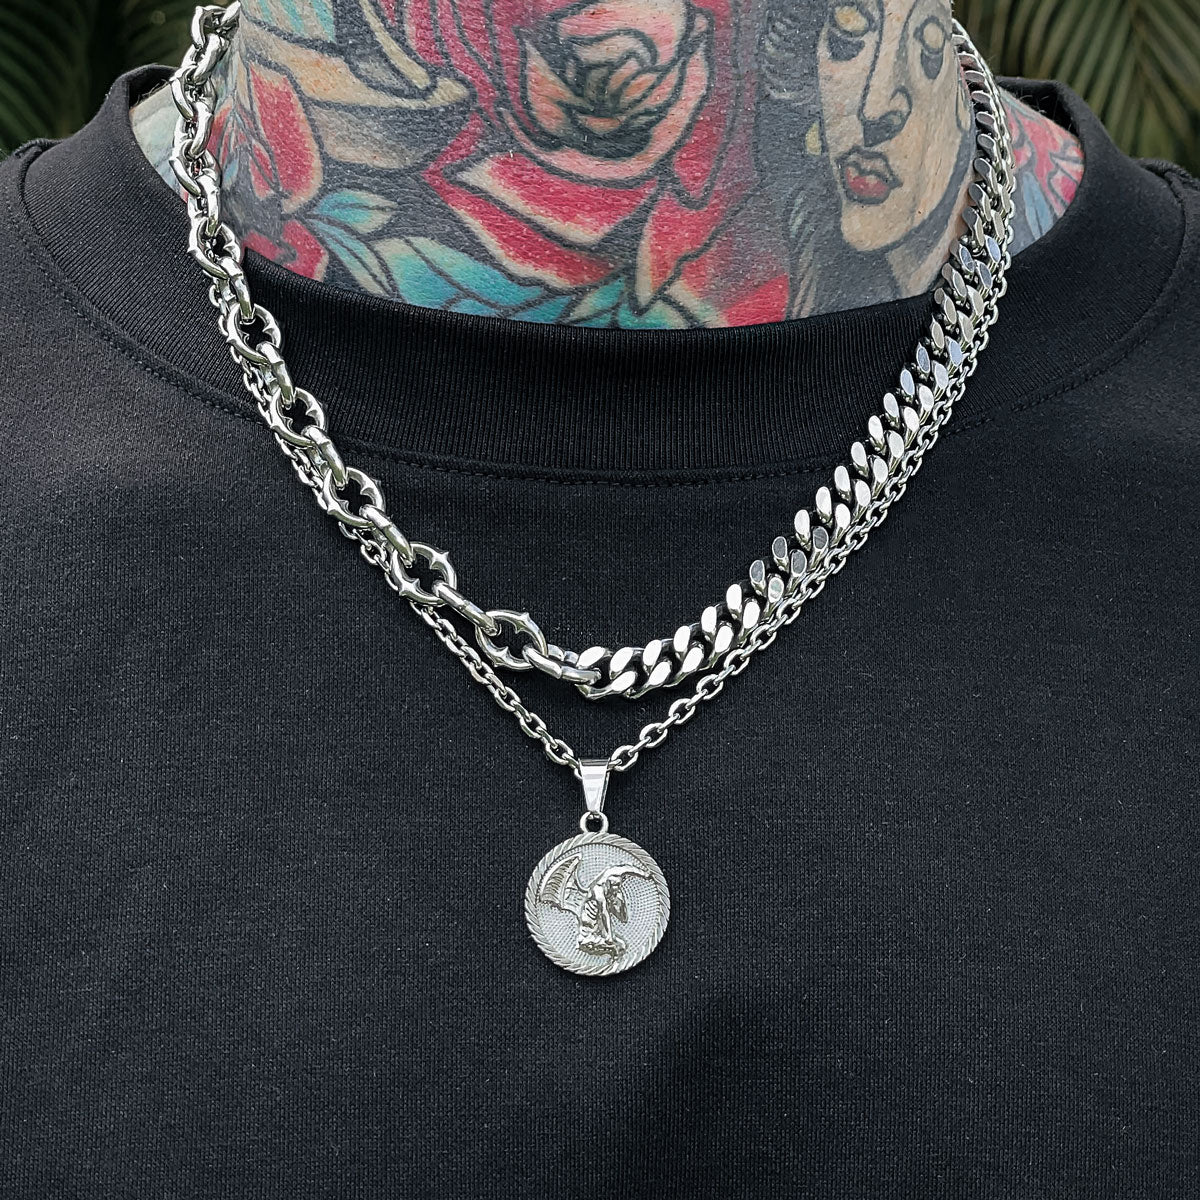 Spiked link chain with cuban links